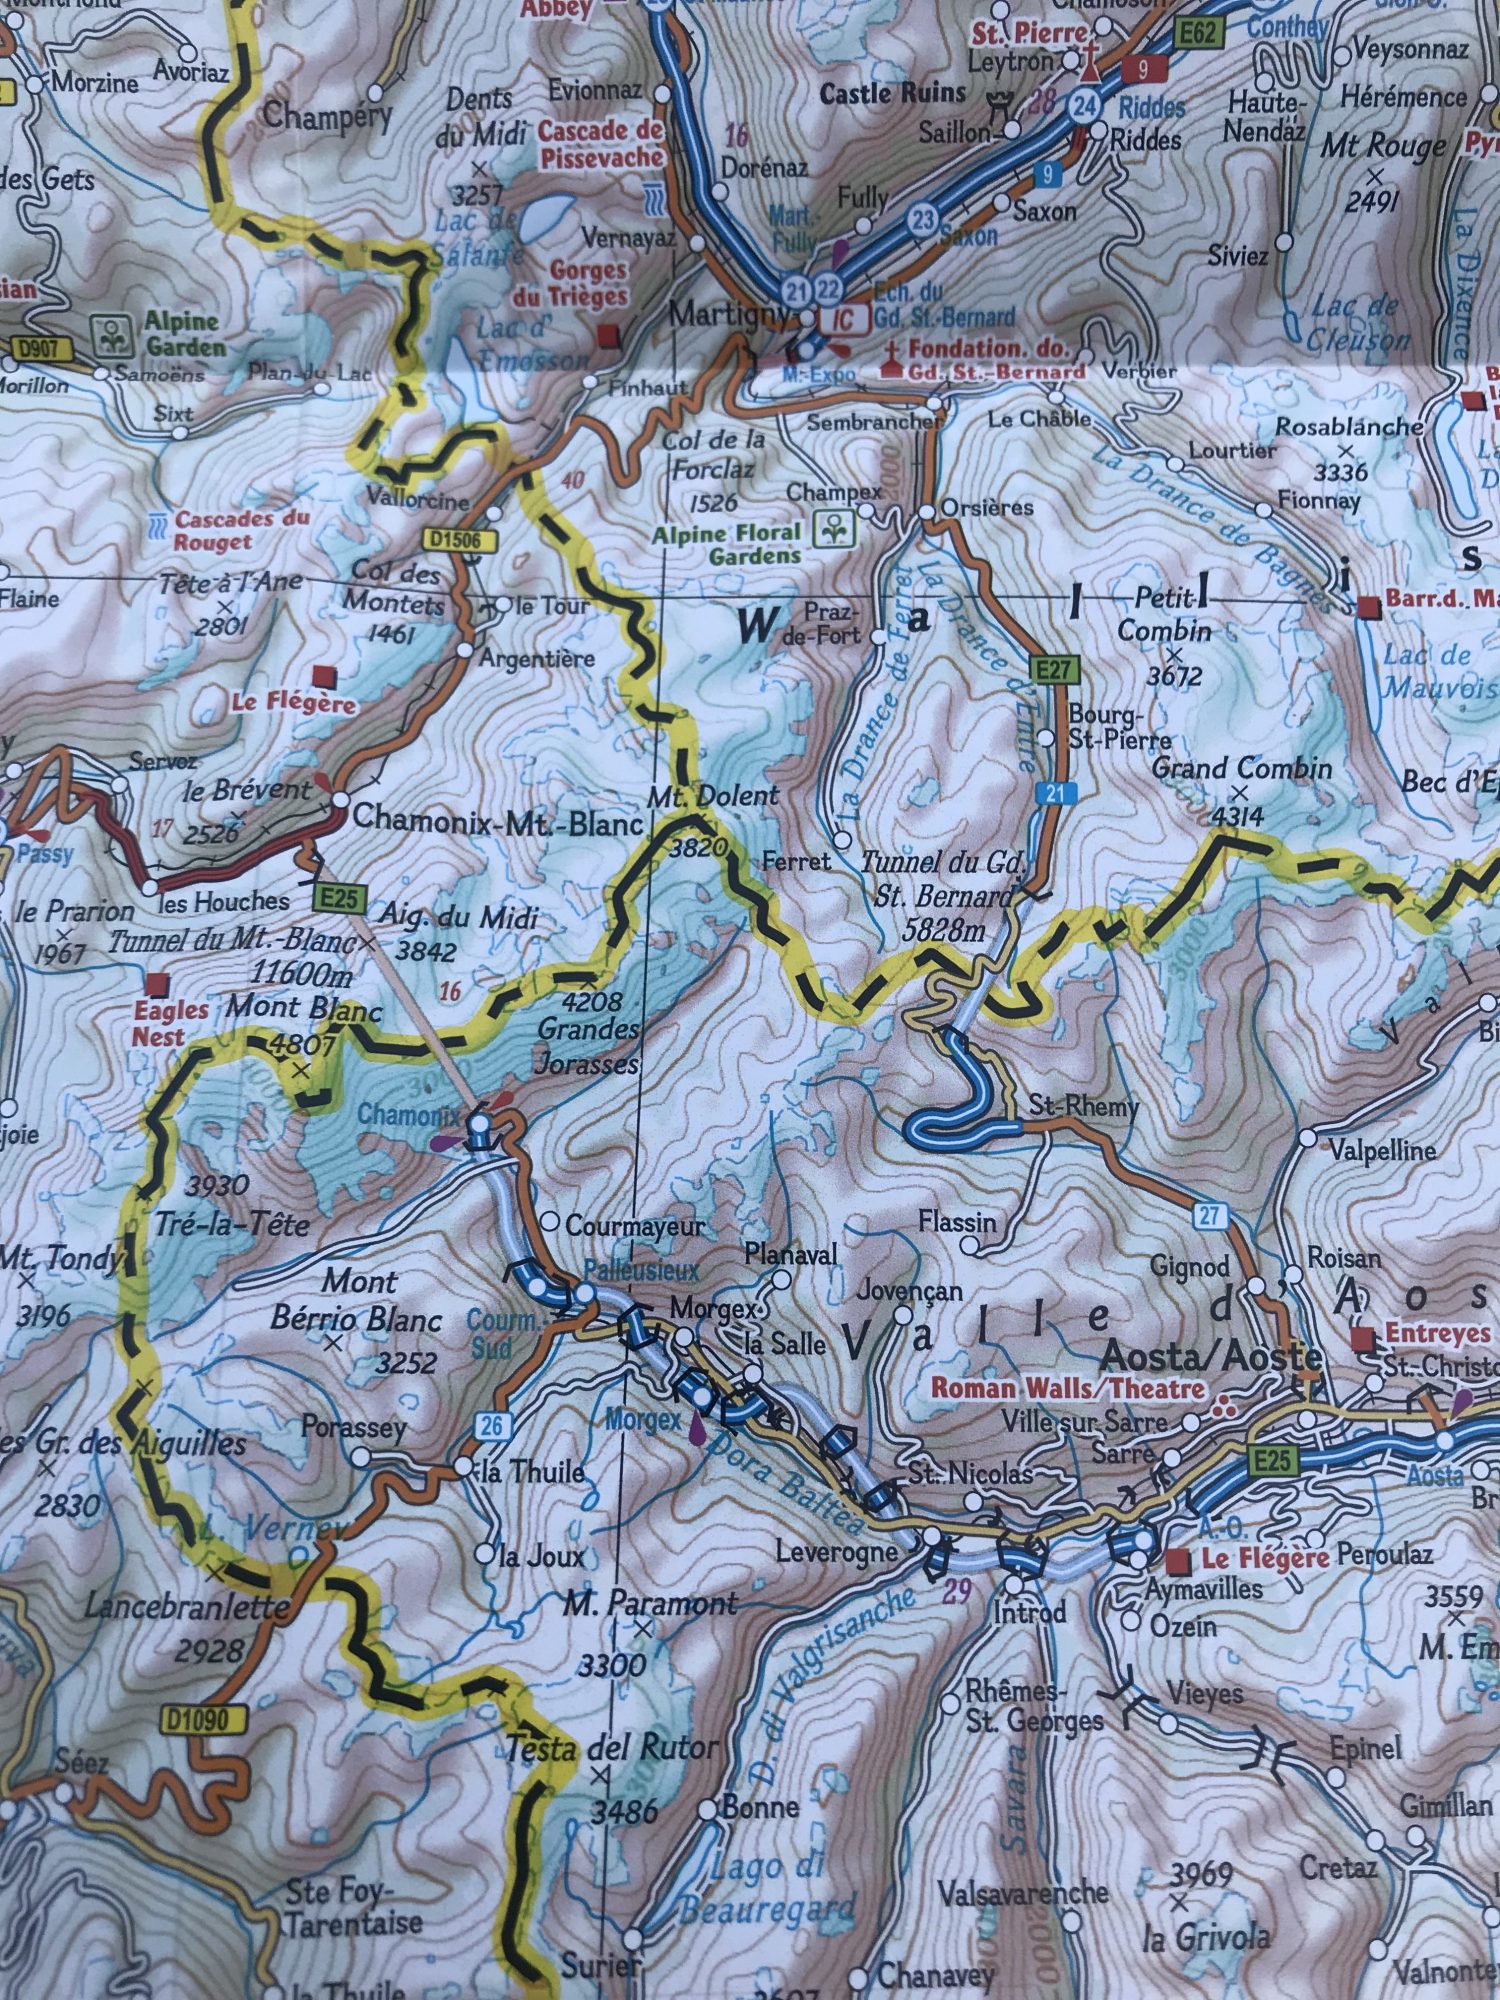 Getting to Chamonix and then to Courmayeur - all planned by looking at a map. Photo: The-Ski-Guru.